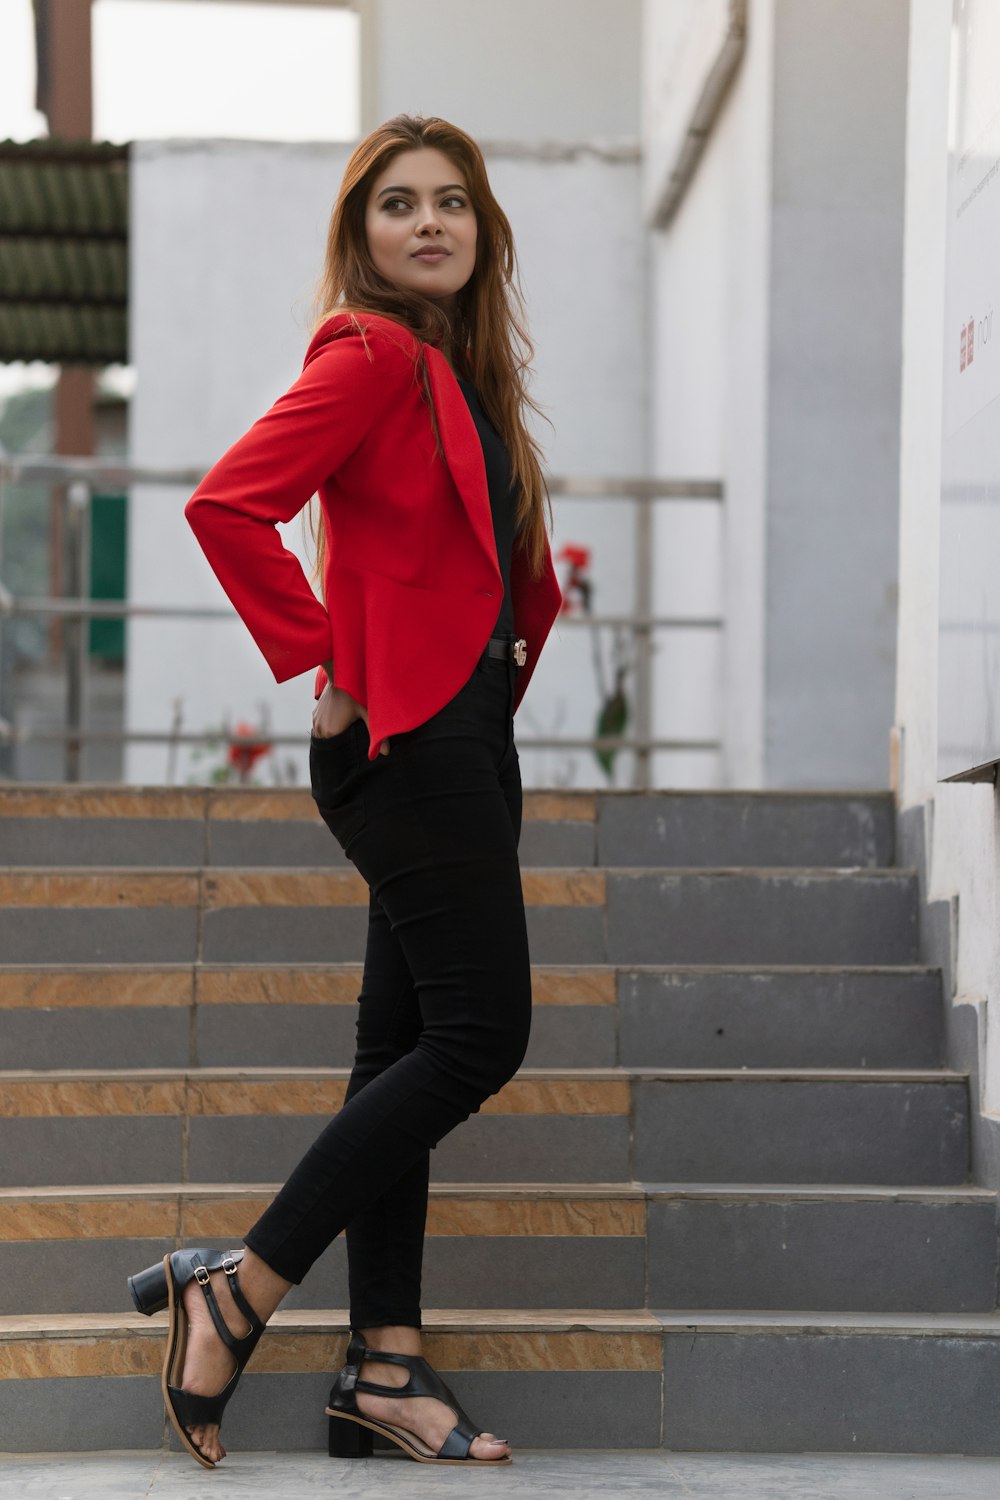 Woman in red blazer and black pants standing on gray concrete stairs photo  – Free Clothing Image on Unsplash